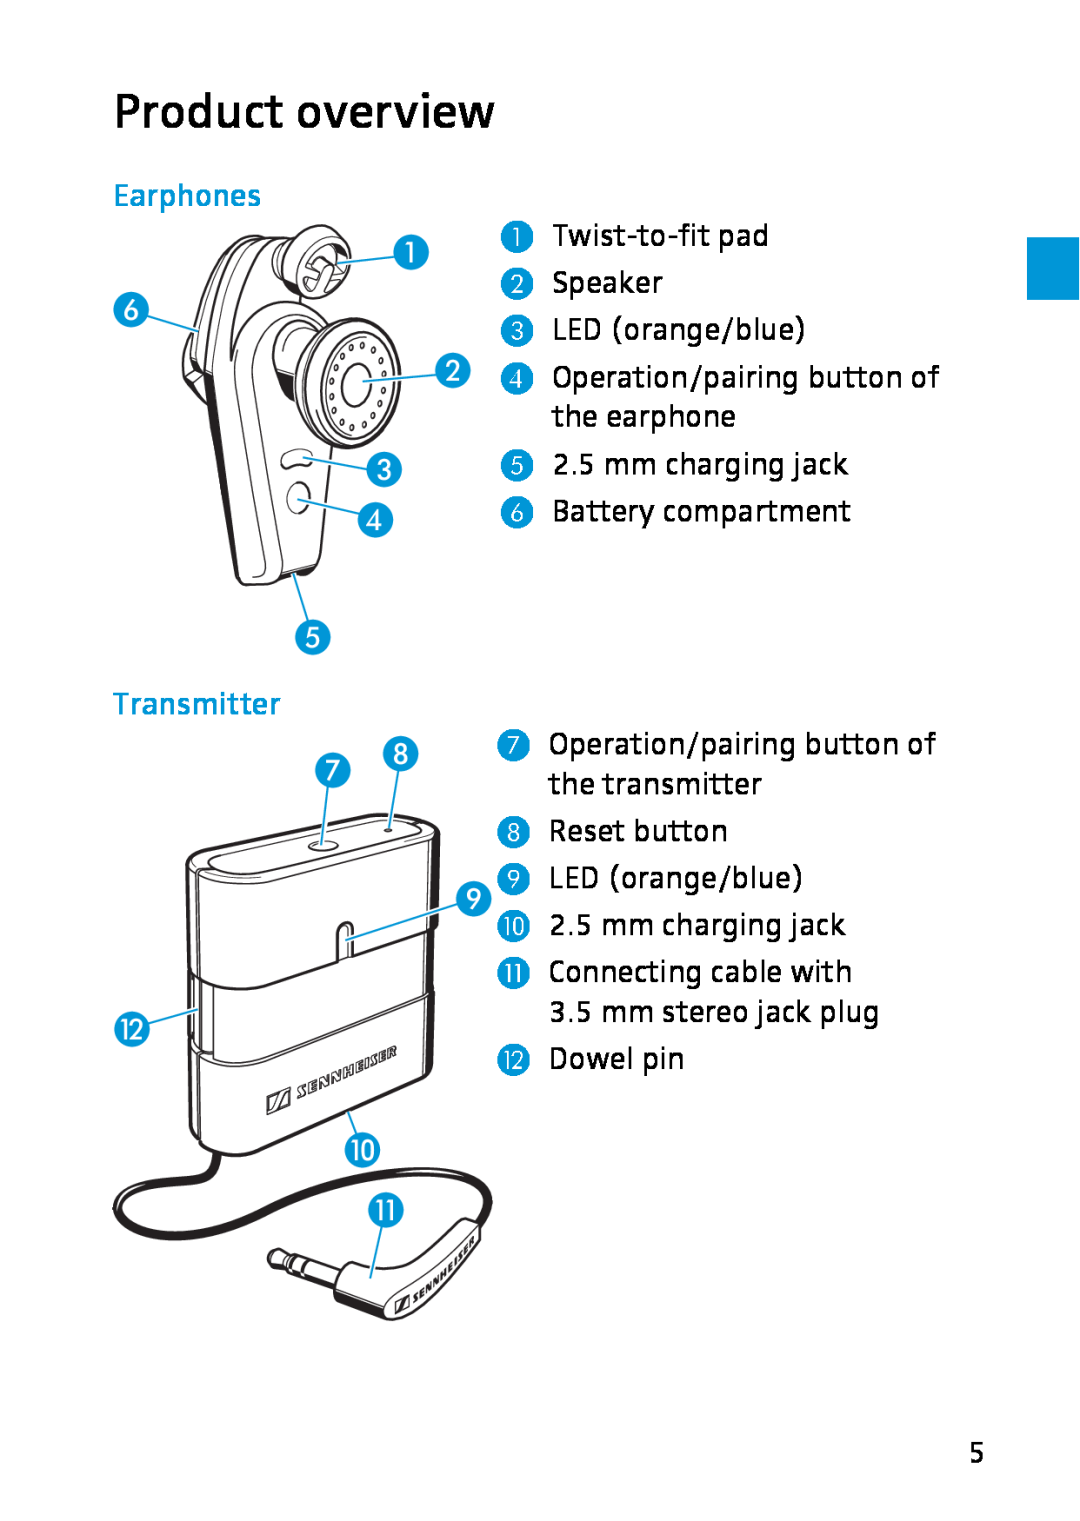 Sennheiser MX W1 Product overview, Earphones, Transmitter, Twist-to-fit pad Speaker LED orange/blue, Battery compartment 